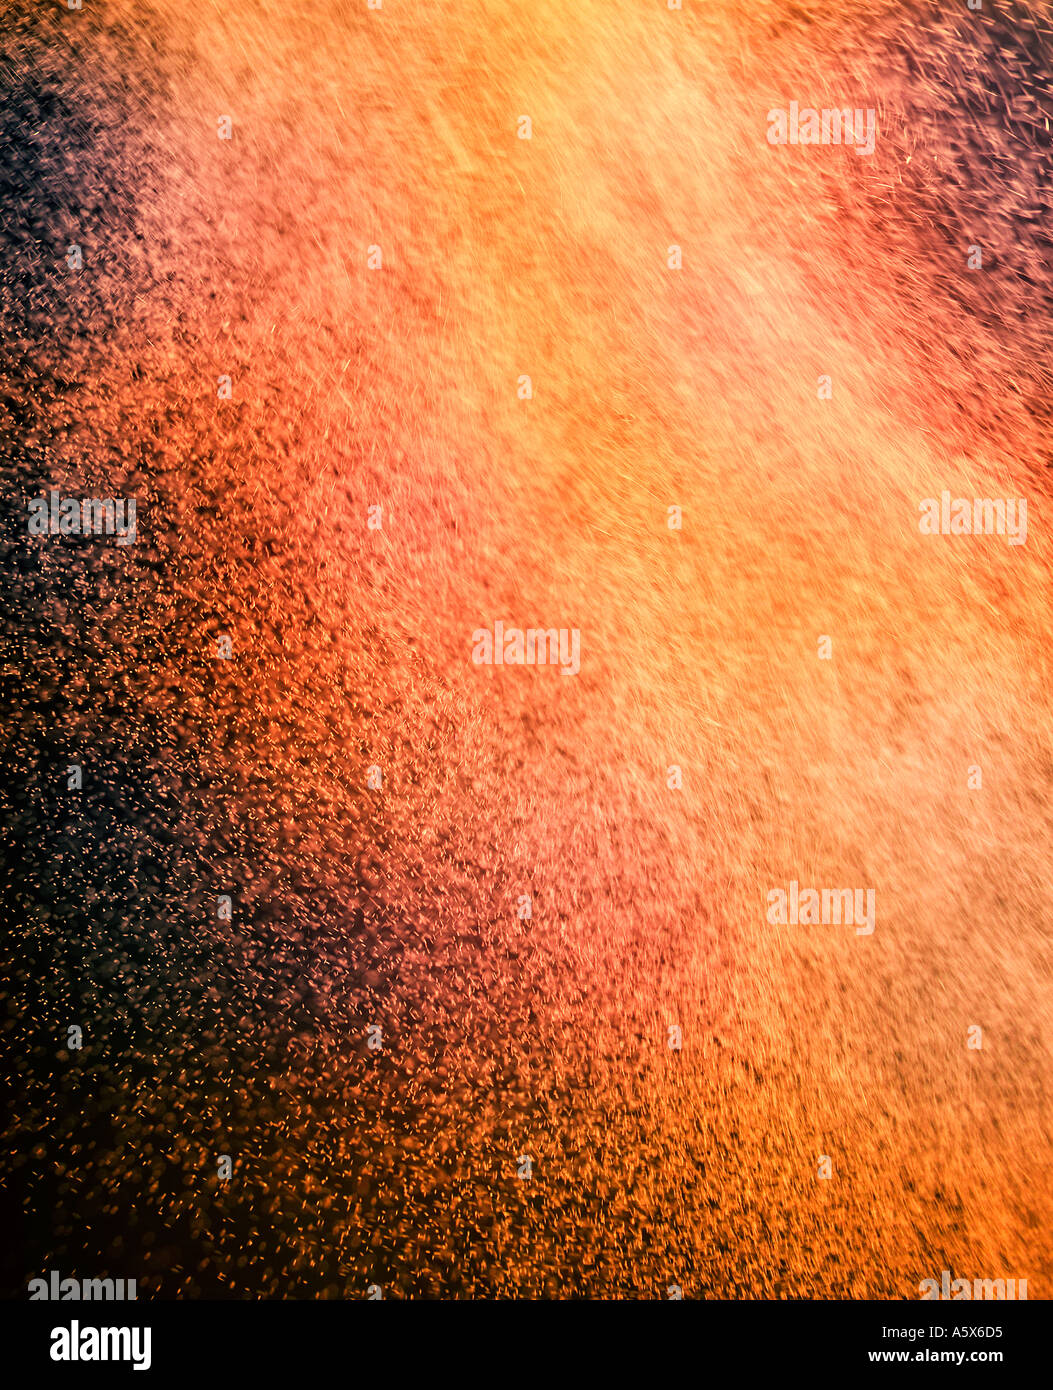 ABSTRACT IMAGE OF RED AND ORANGE PARTICLES SWIRLING IN TURBULENT AIR Stock Photo